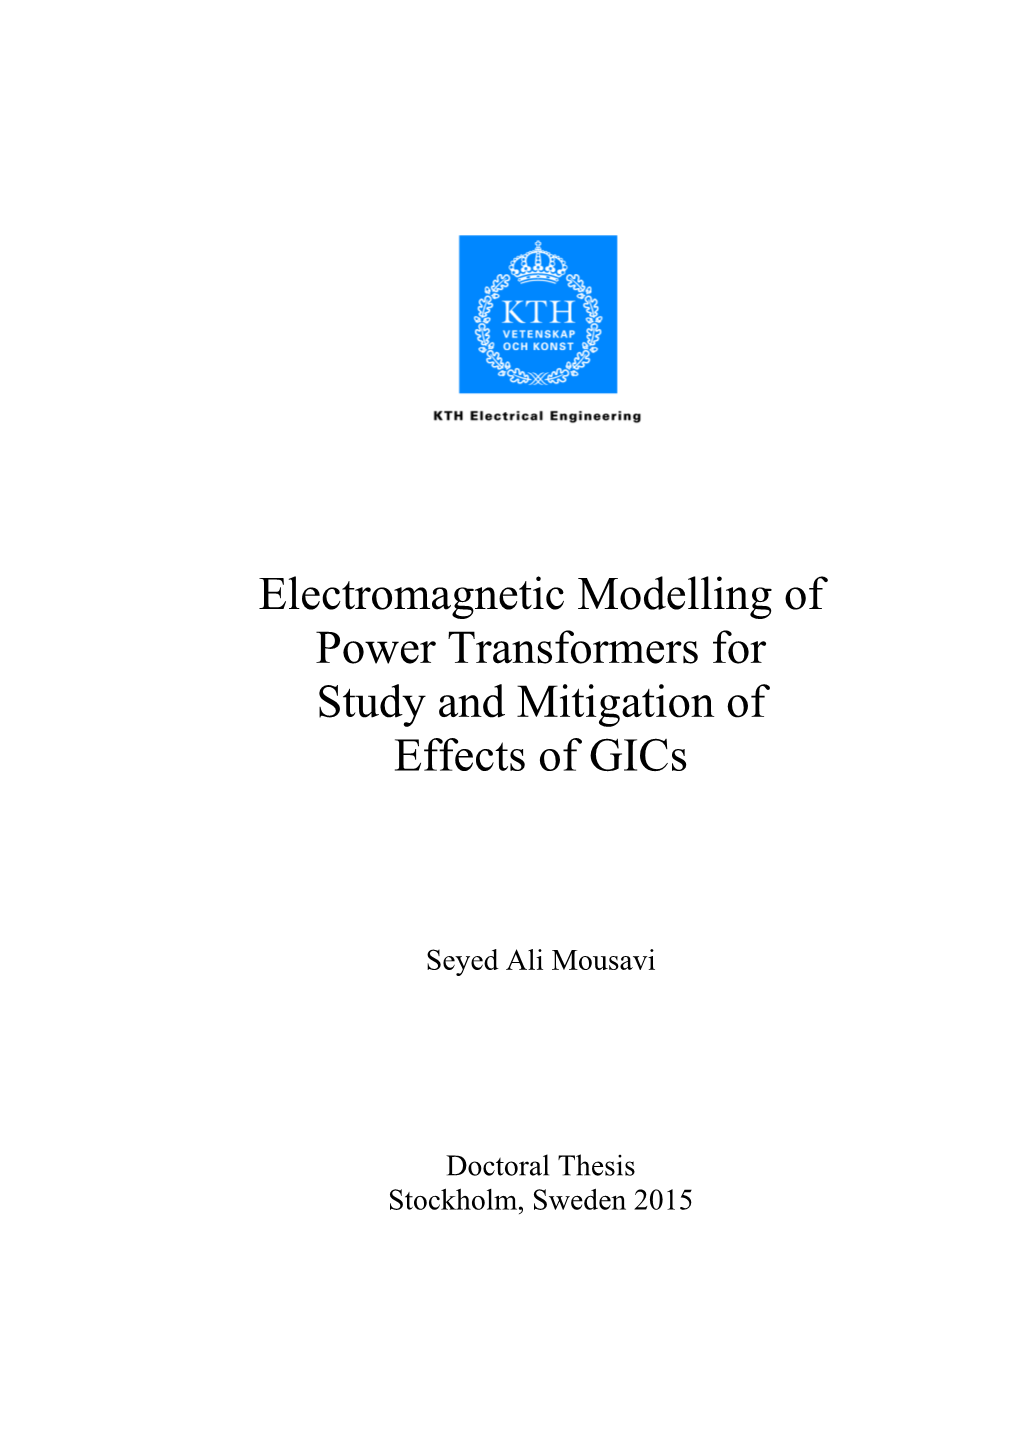 Electromagnetic Modelling of Power Transformers for Study and Mitigation of Effects of Gics